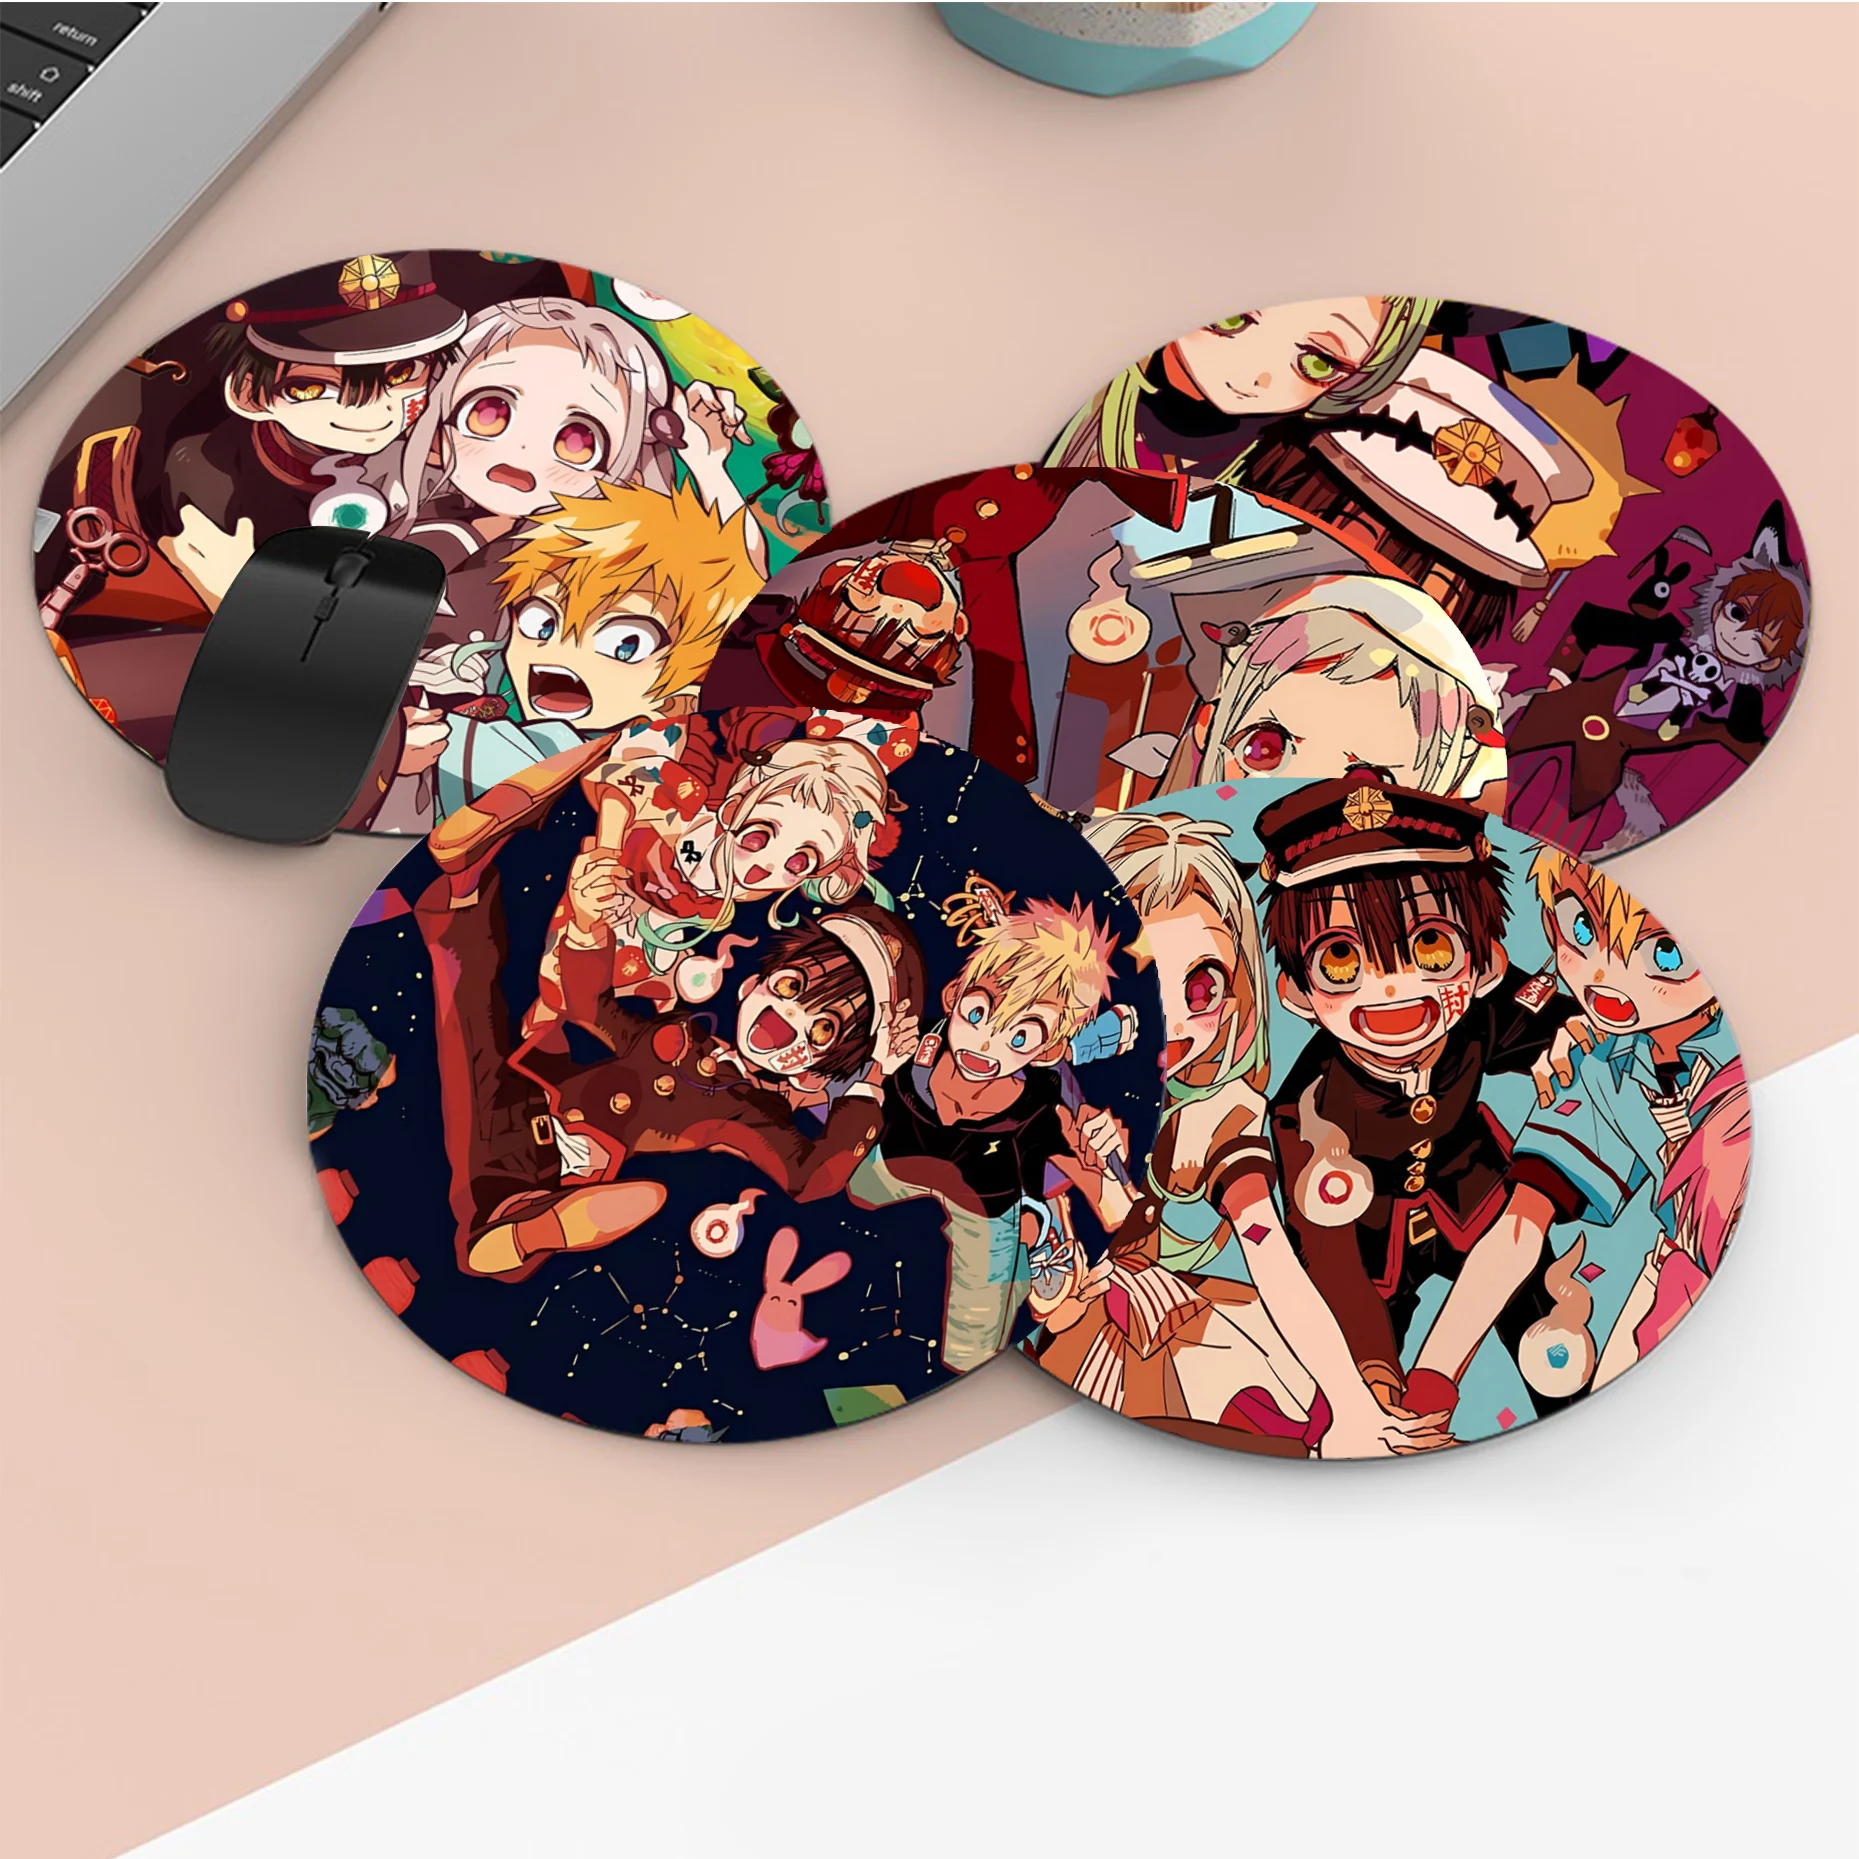 

Toilet bound Hanako Kun Anime Mousepad Animation Round Big Promotion Mat Computer Keyboard Pad Games Pad for PC Gamer Mousemat